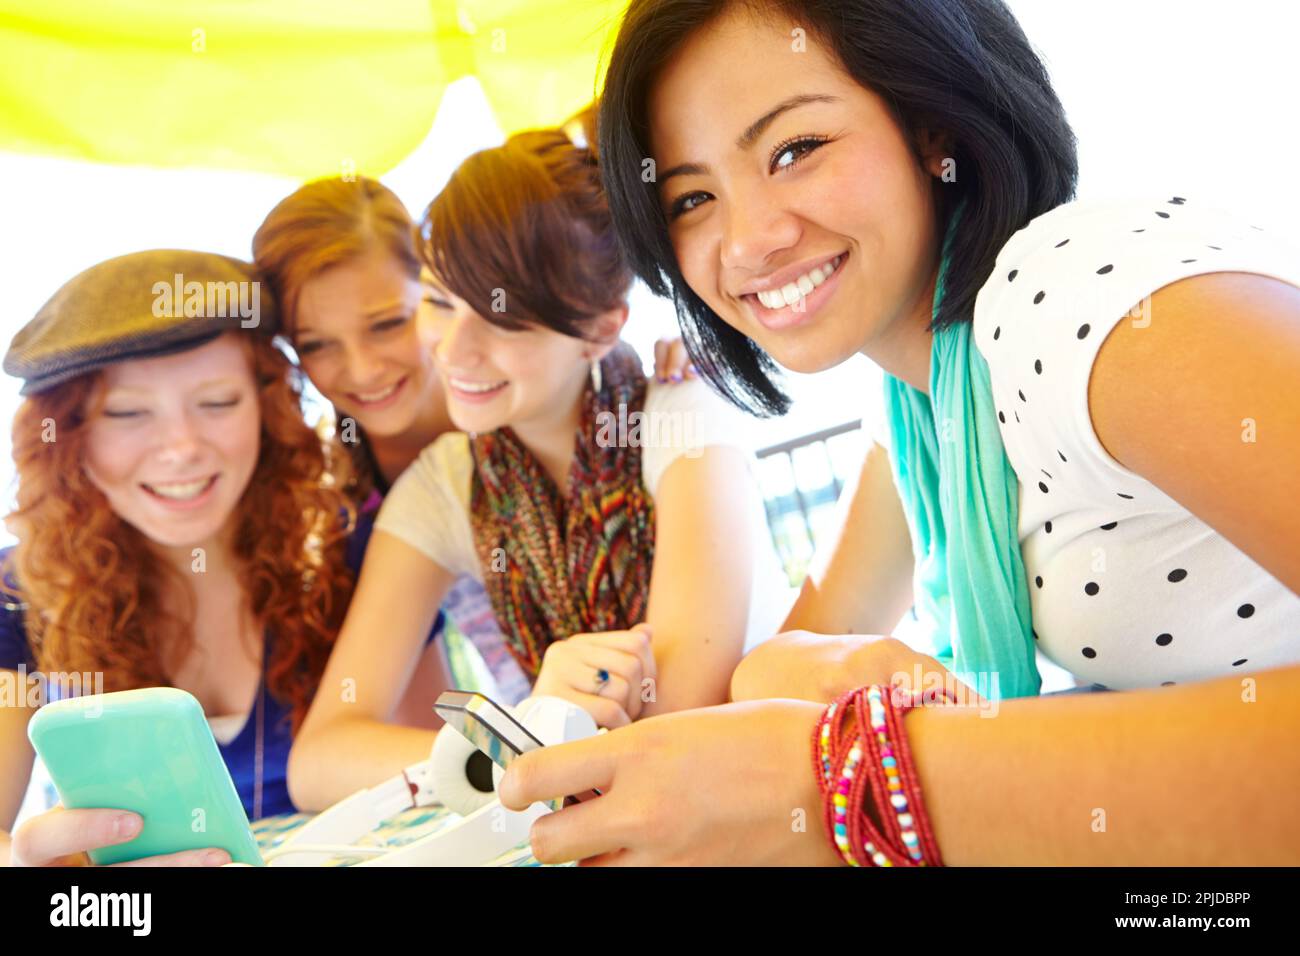 Its hard to separate a girl fro her gadgets. A group of adolescent girls laughing as they look at something on a smartphone screen. Stock Photo